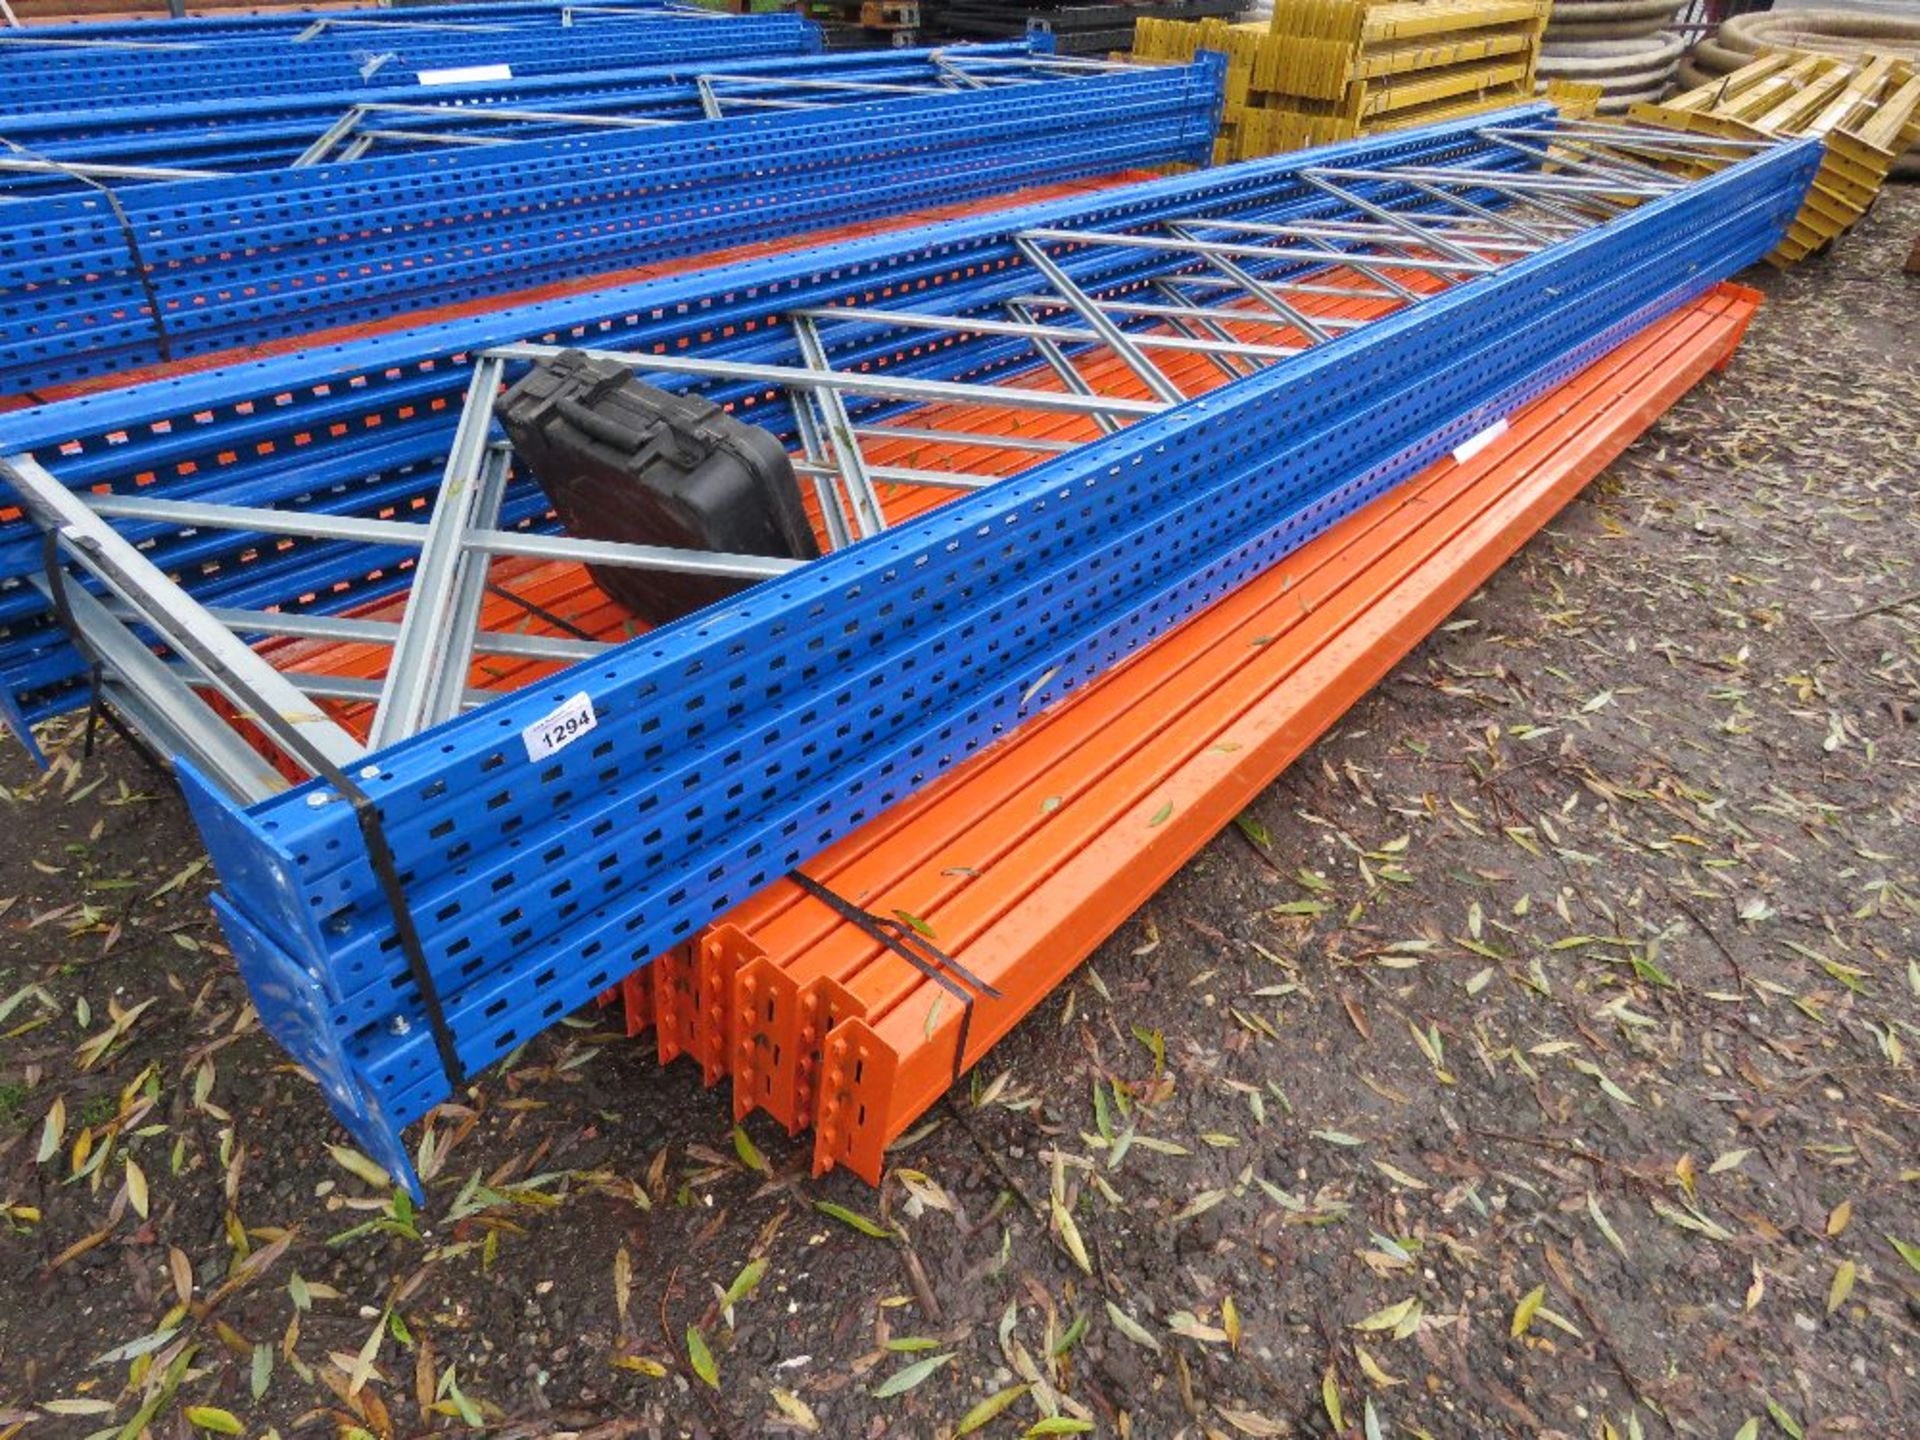 HEAVY DUTY PALLET RACKING: 5 X UPRIGHTS @ 5M HEIGHT WITH A WIDTH OF 0.9M, PLUS 24NO BEAMS @ 3.9M LEN